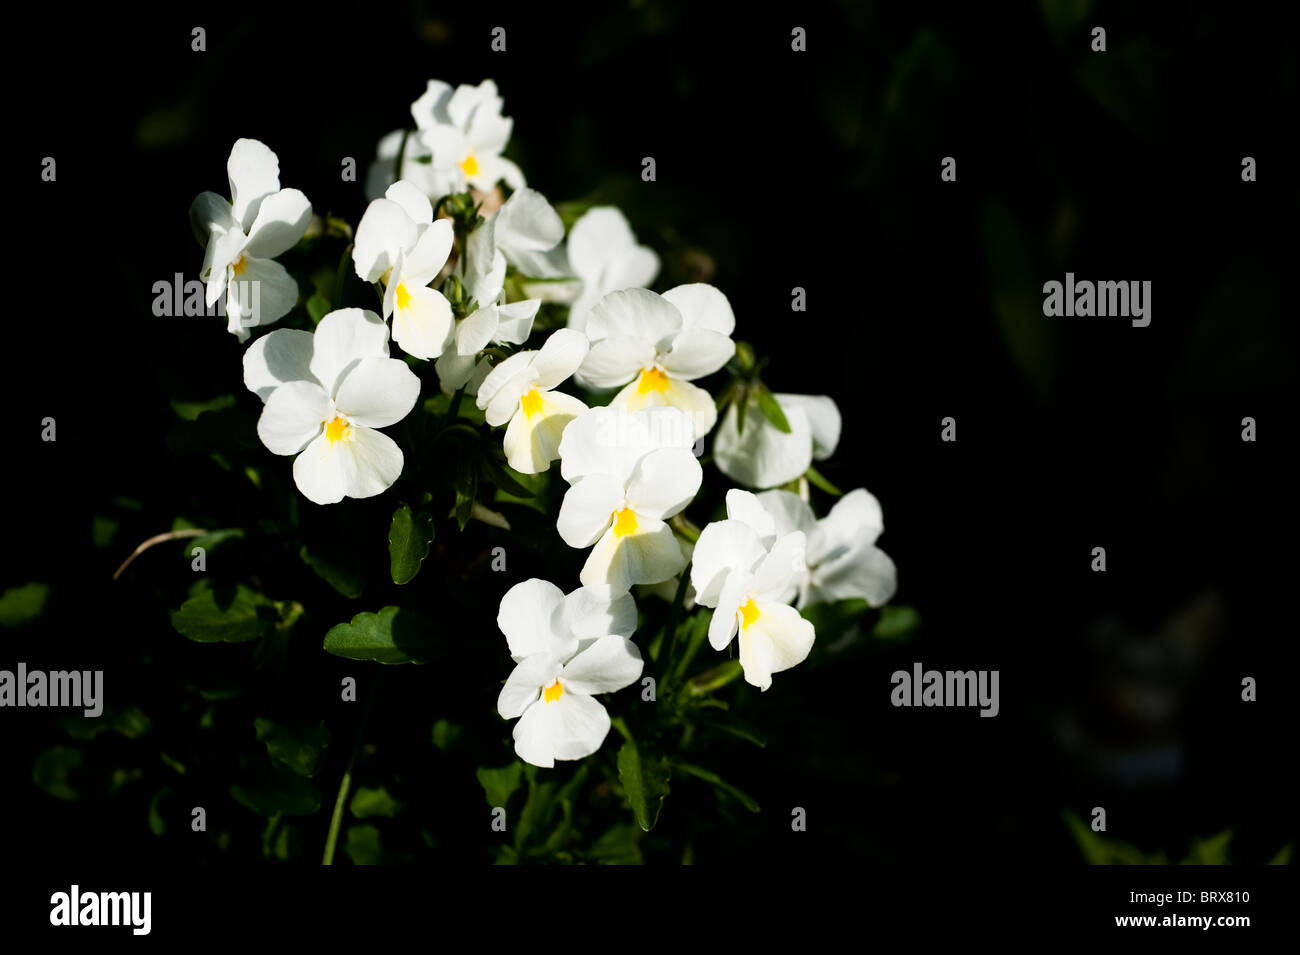 White violas in flower in late summer Stock Photo